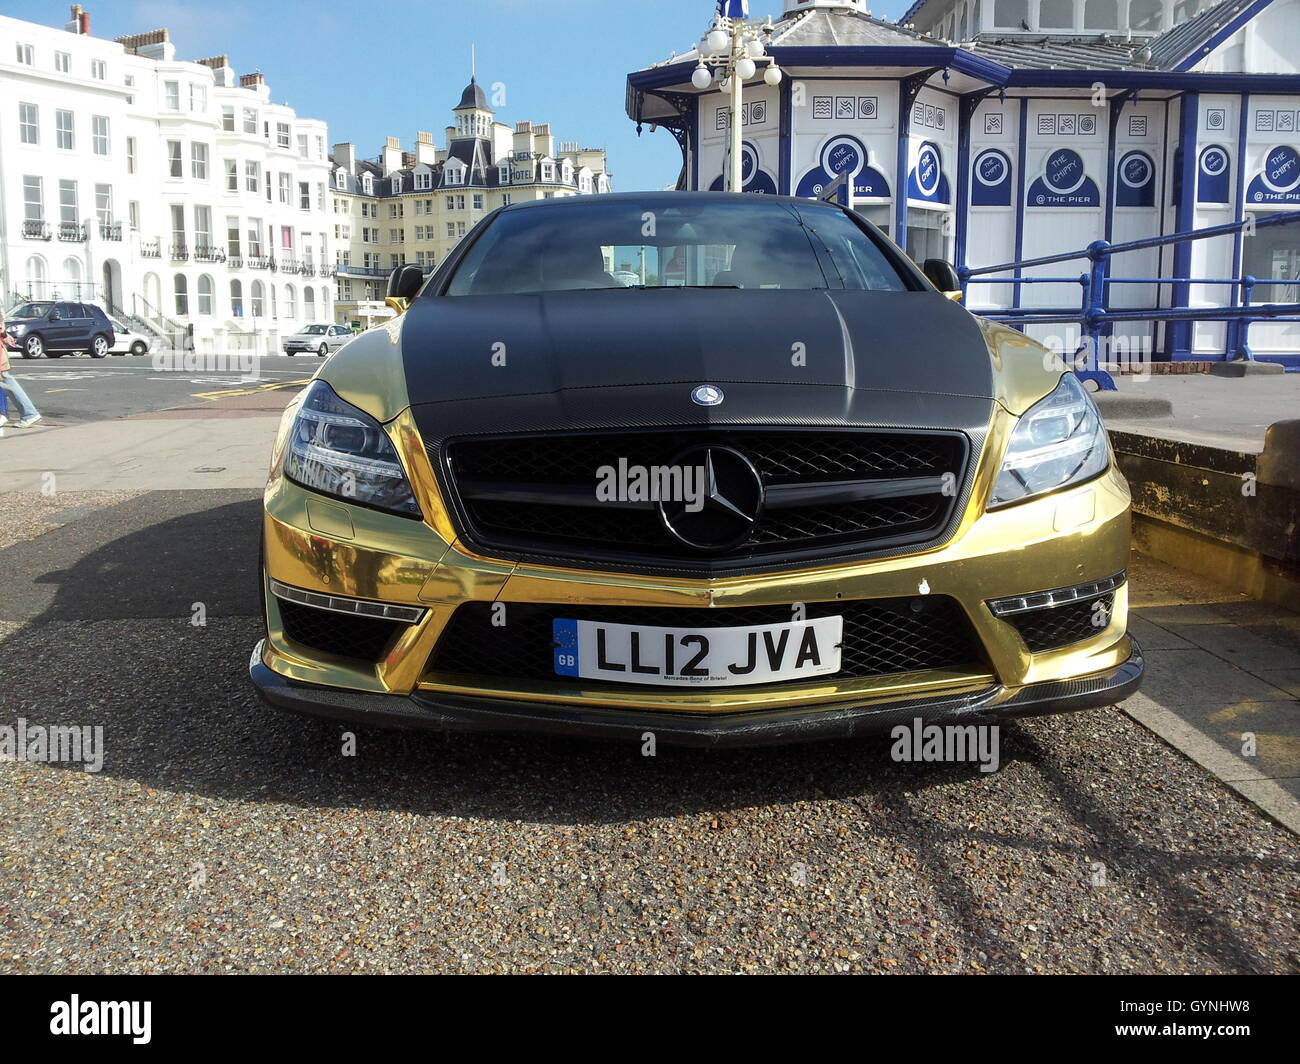 Eastbourne, UK. 18th Sep, 2016. The gold AMG Mercedes belonging to Sheikh Abid Gulzar parked outside the entrance to Eastbourne pier, which he owns. Credit:  James Bell/Alamy Live News Stock Photo